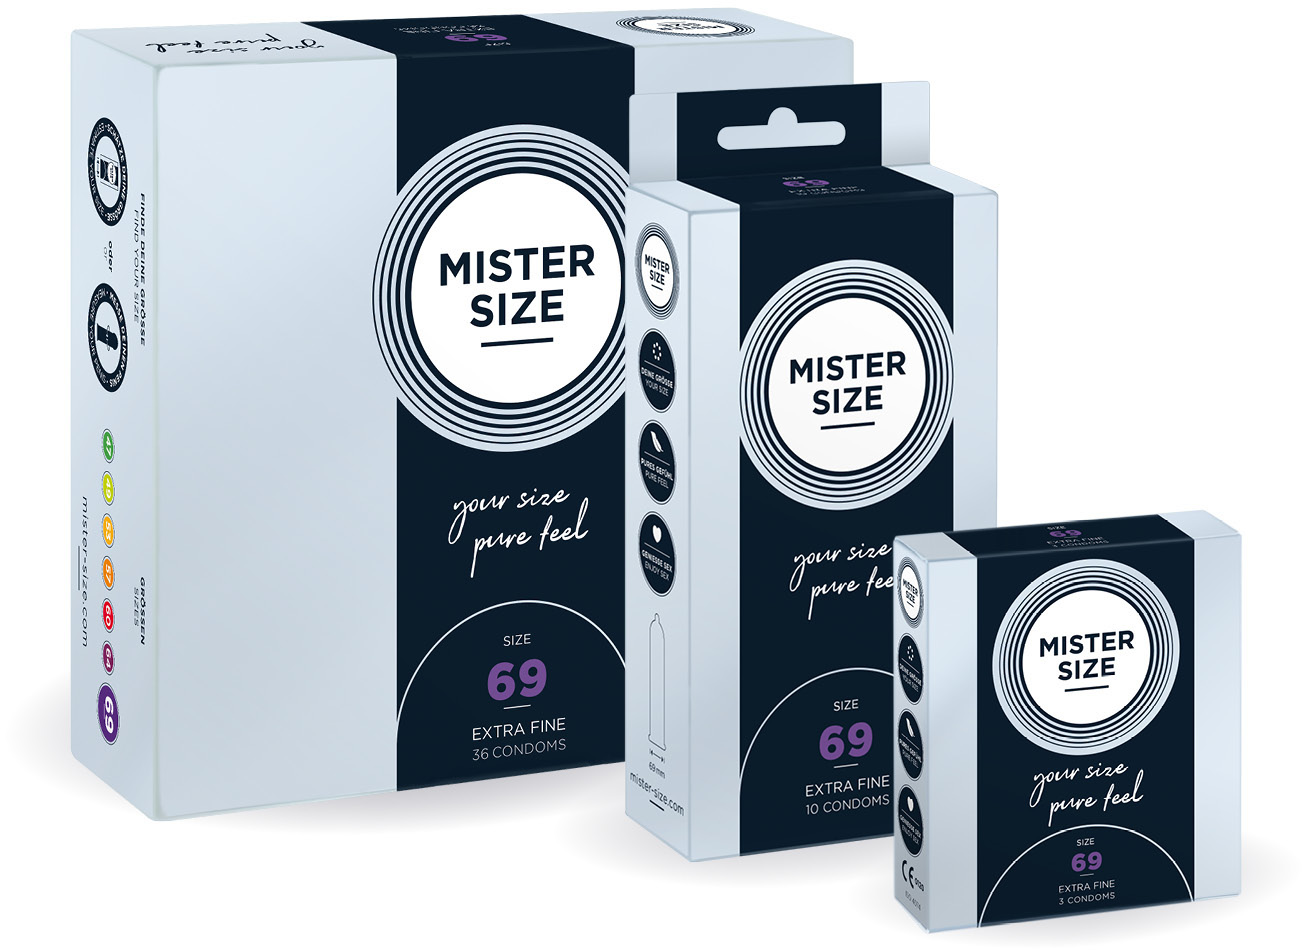 Mister Size condoms in 3 pack sizes